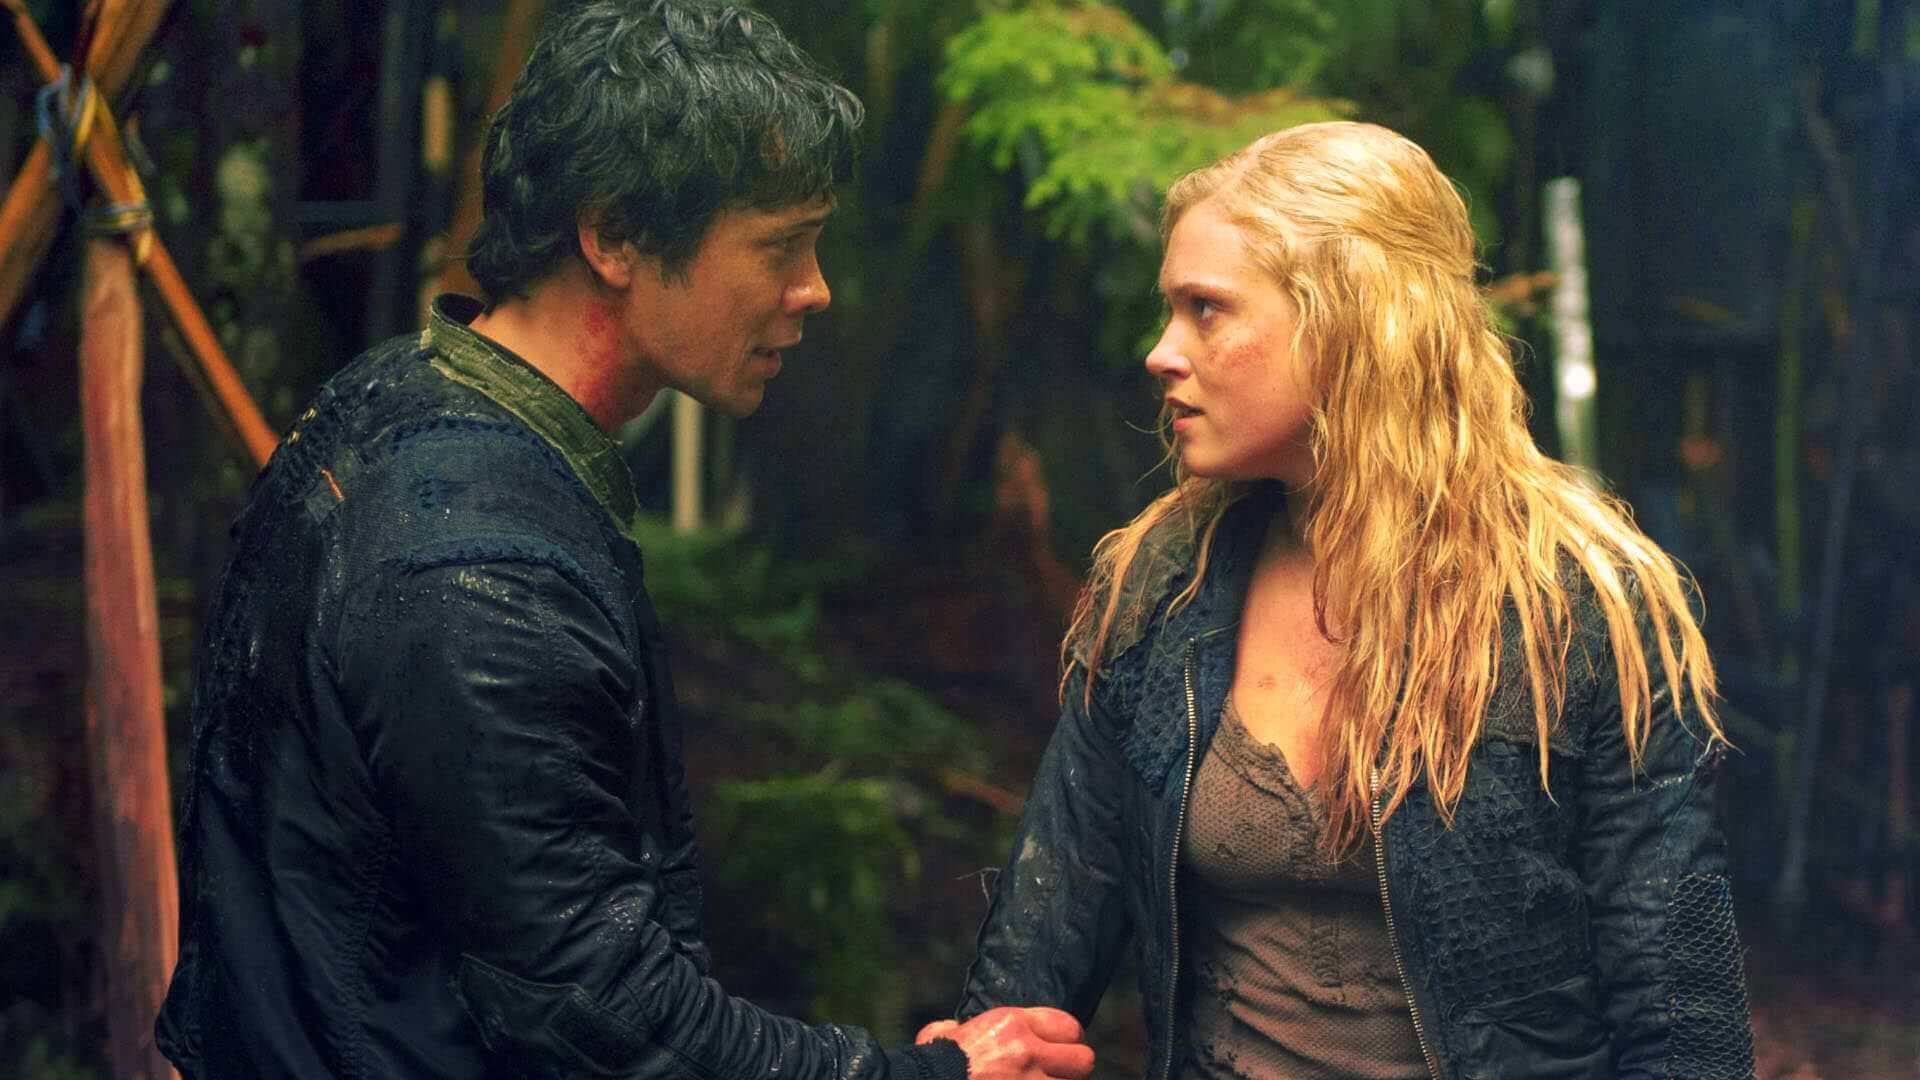 Clarke And Bellamy The 100 Tv Show 37904779 1920 1080